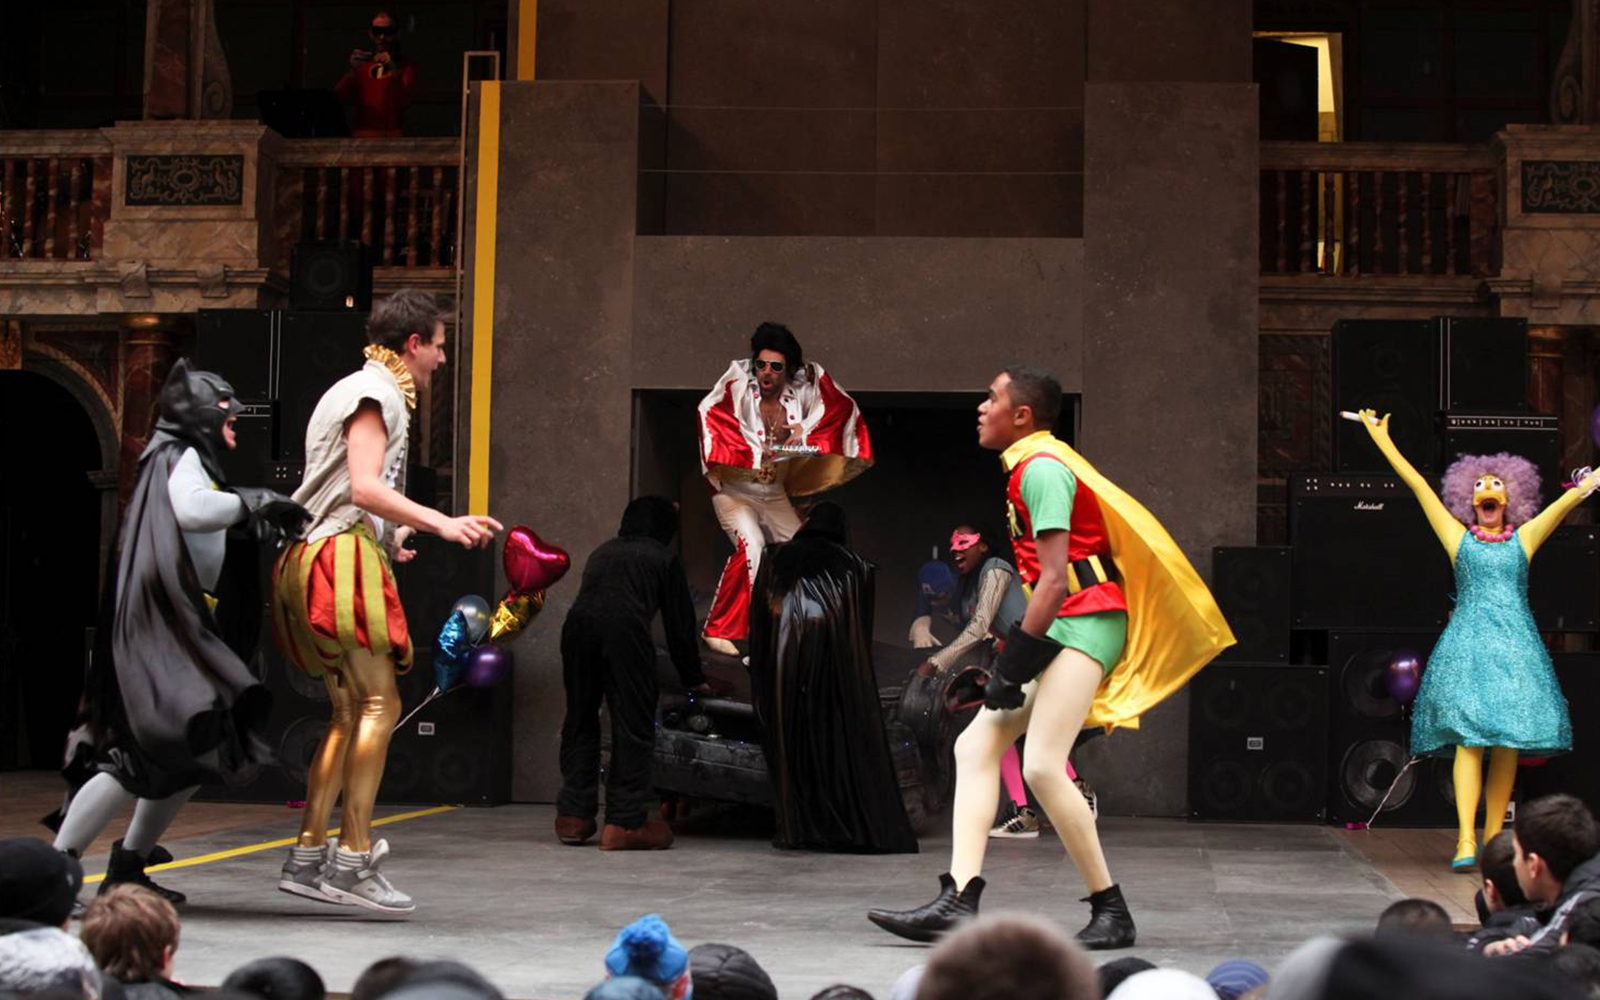 Actors on stage in fancy dress costumes are about to fight